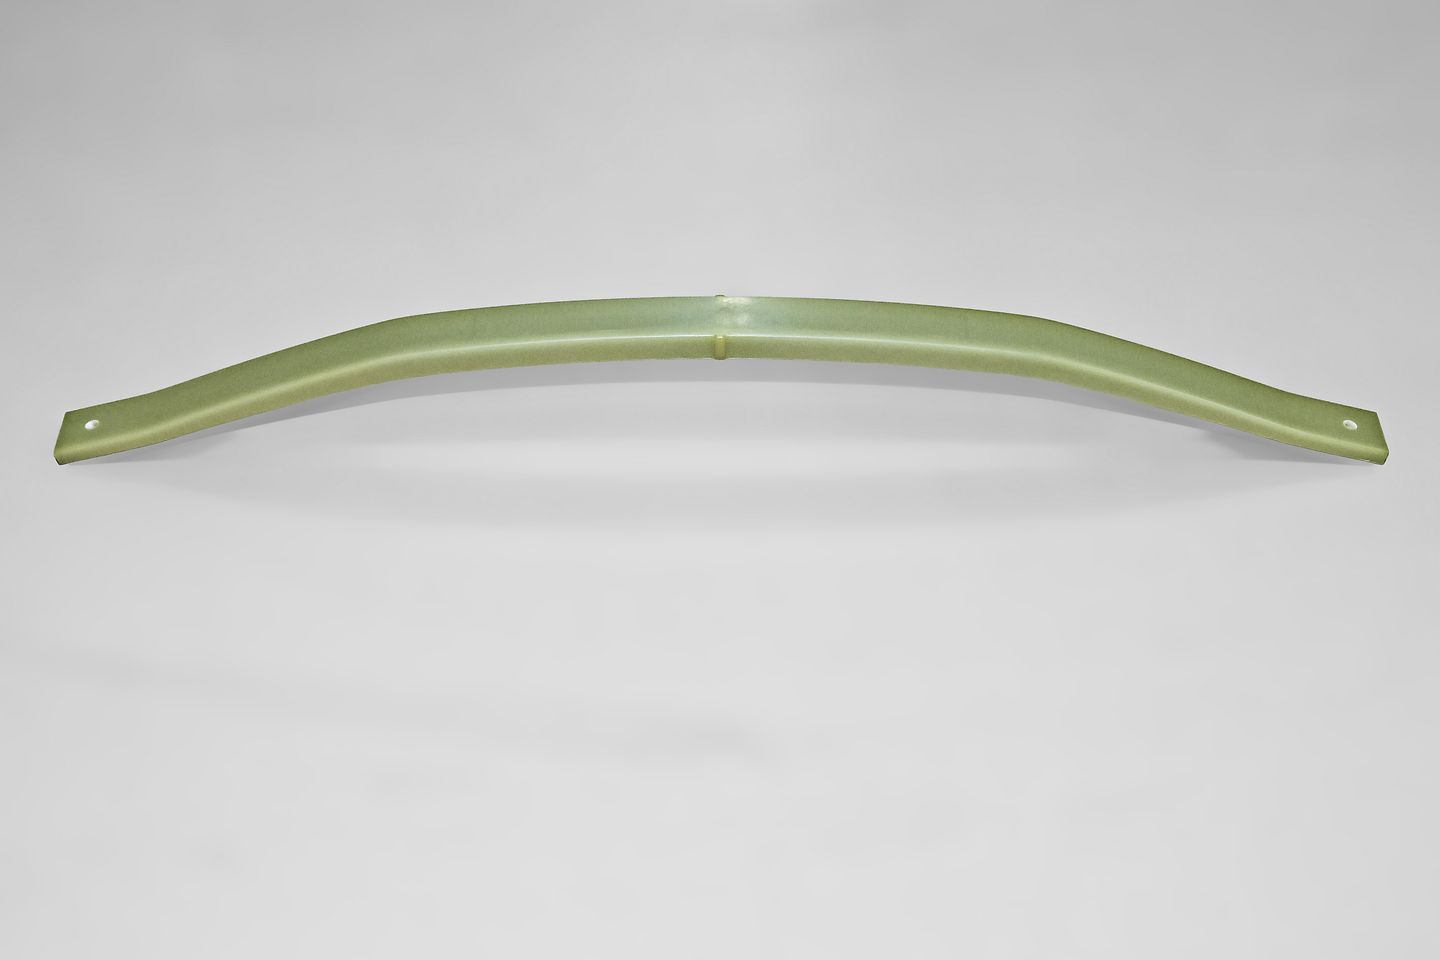 The fiber-reinforced composite leaf spring is produced based on the polyurethane matrix resin Loctite MAX 2 from Henkel.